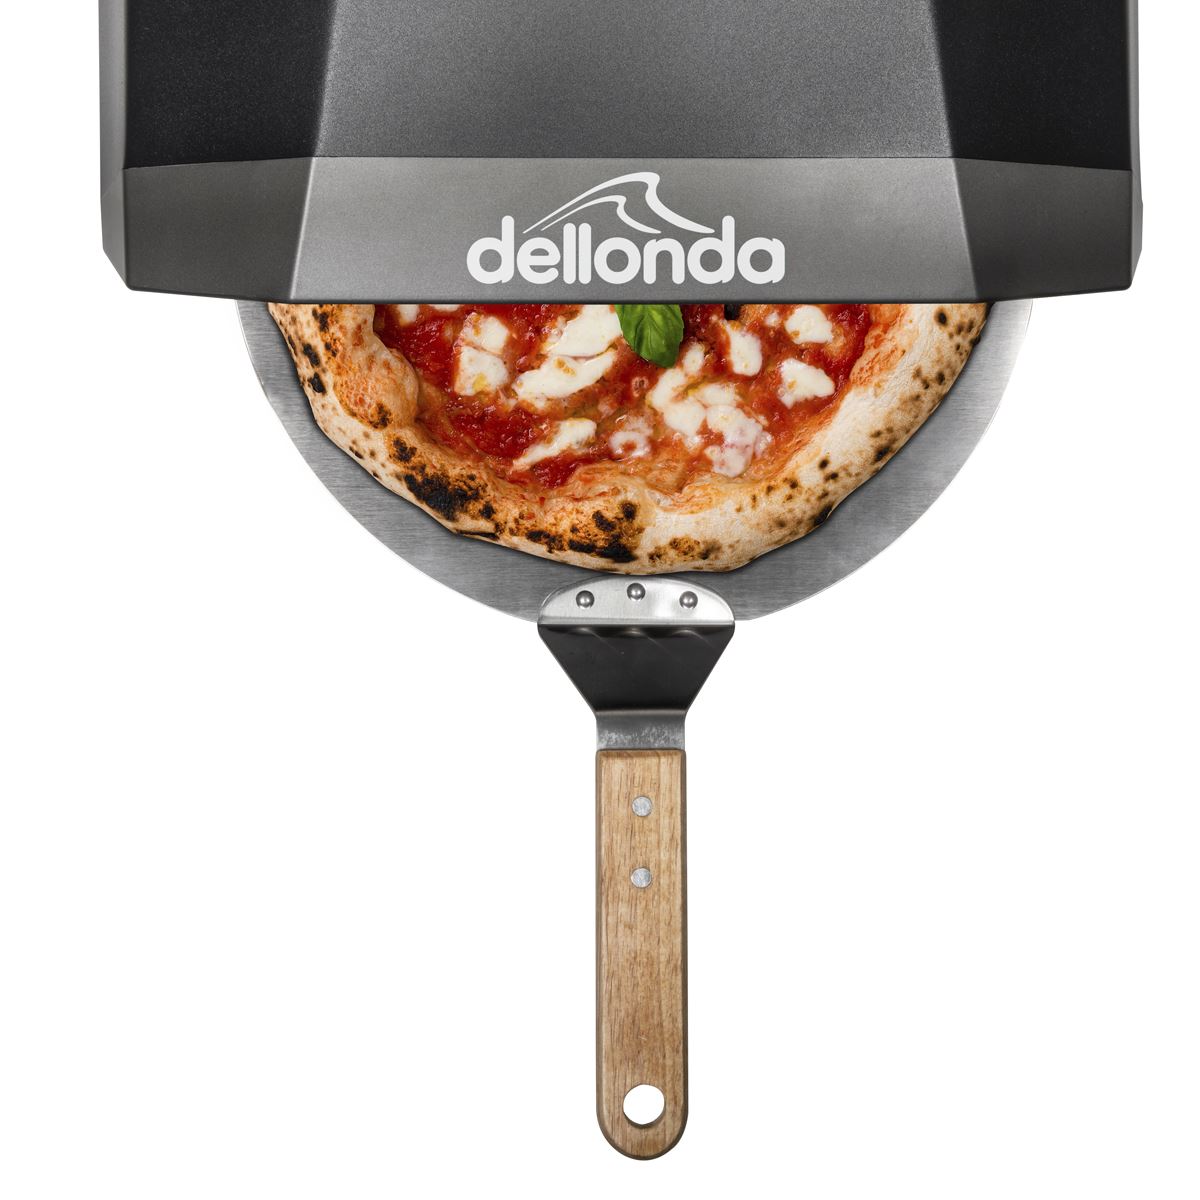 Dellonda Gas Pizza Oven with Gas Regulator, Water Resistant Cover/Carry Bag & 12" Pizza Peel